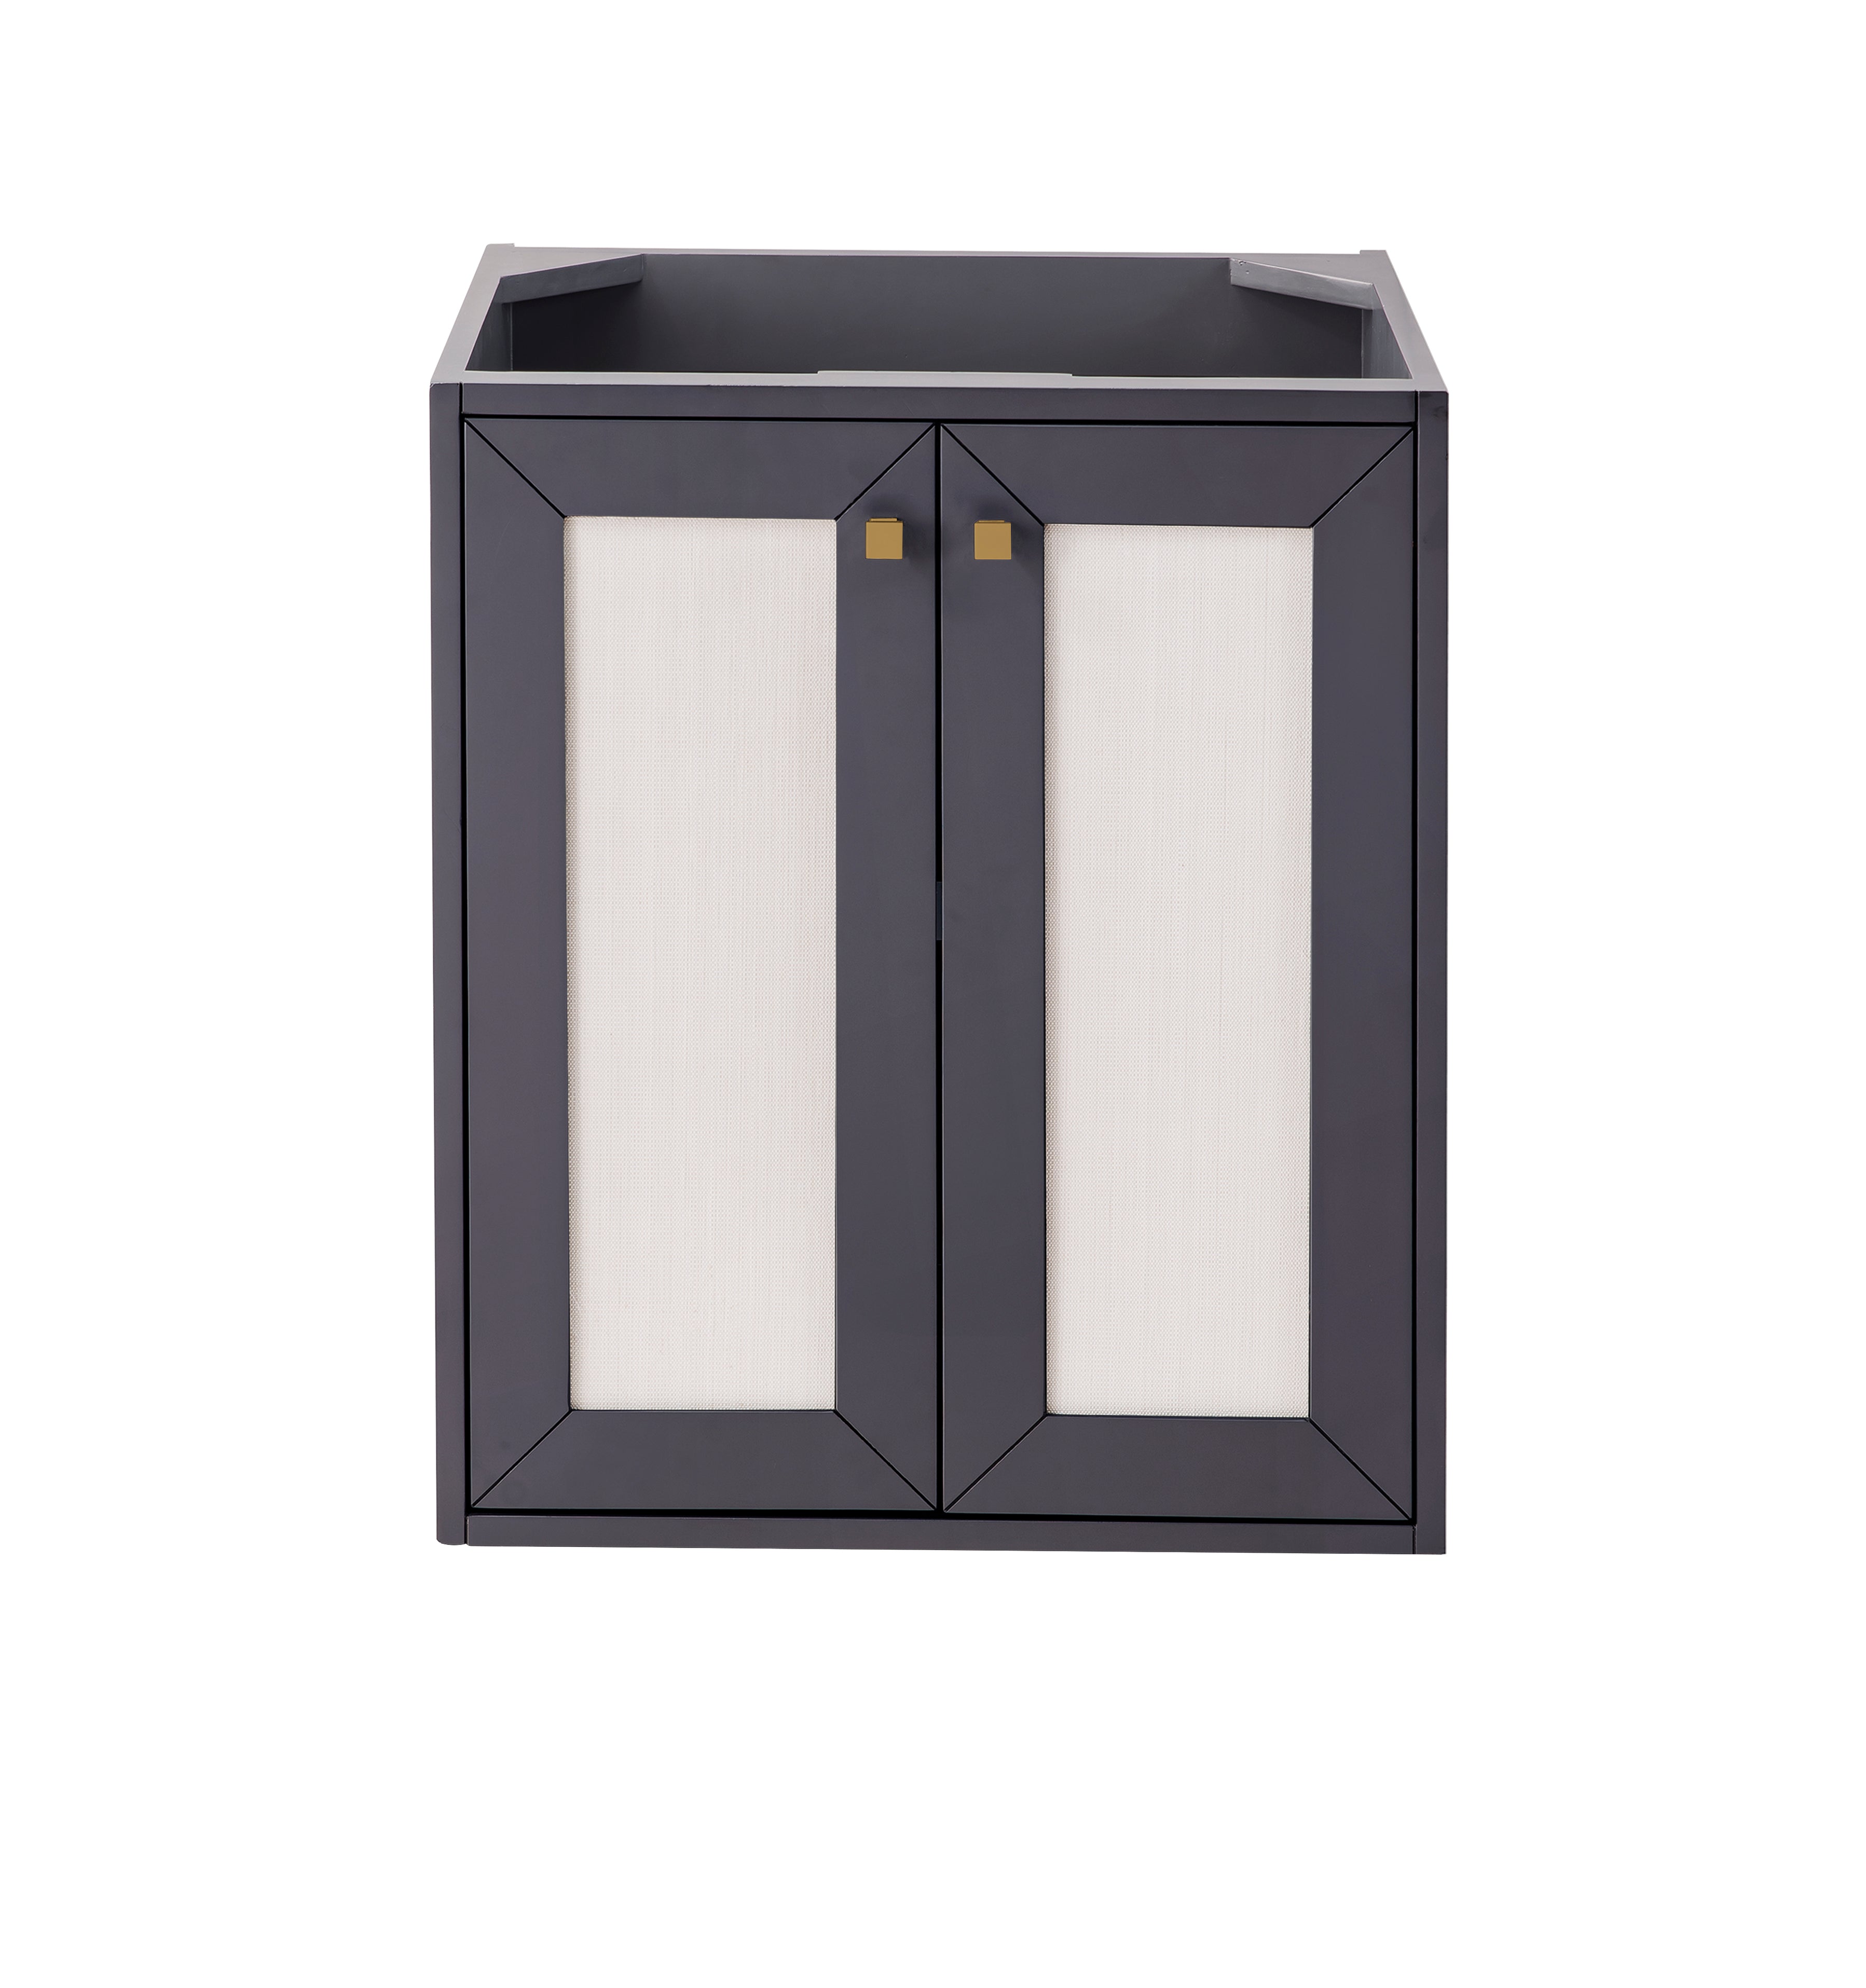 mineral gray Vanity Cabinet